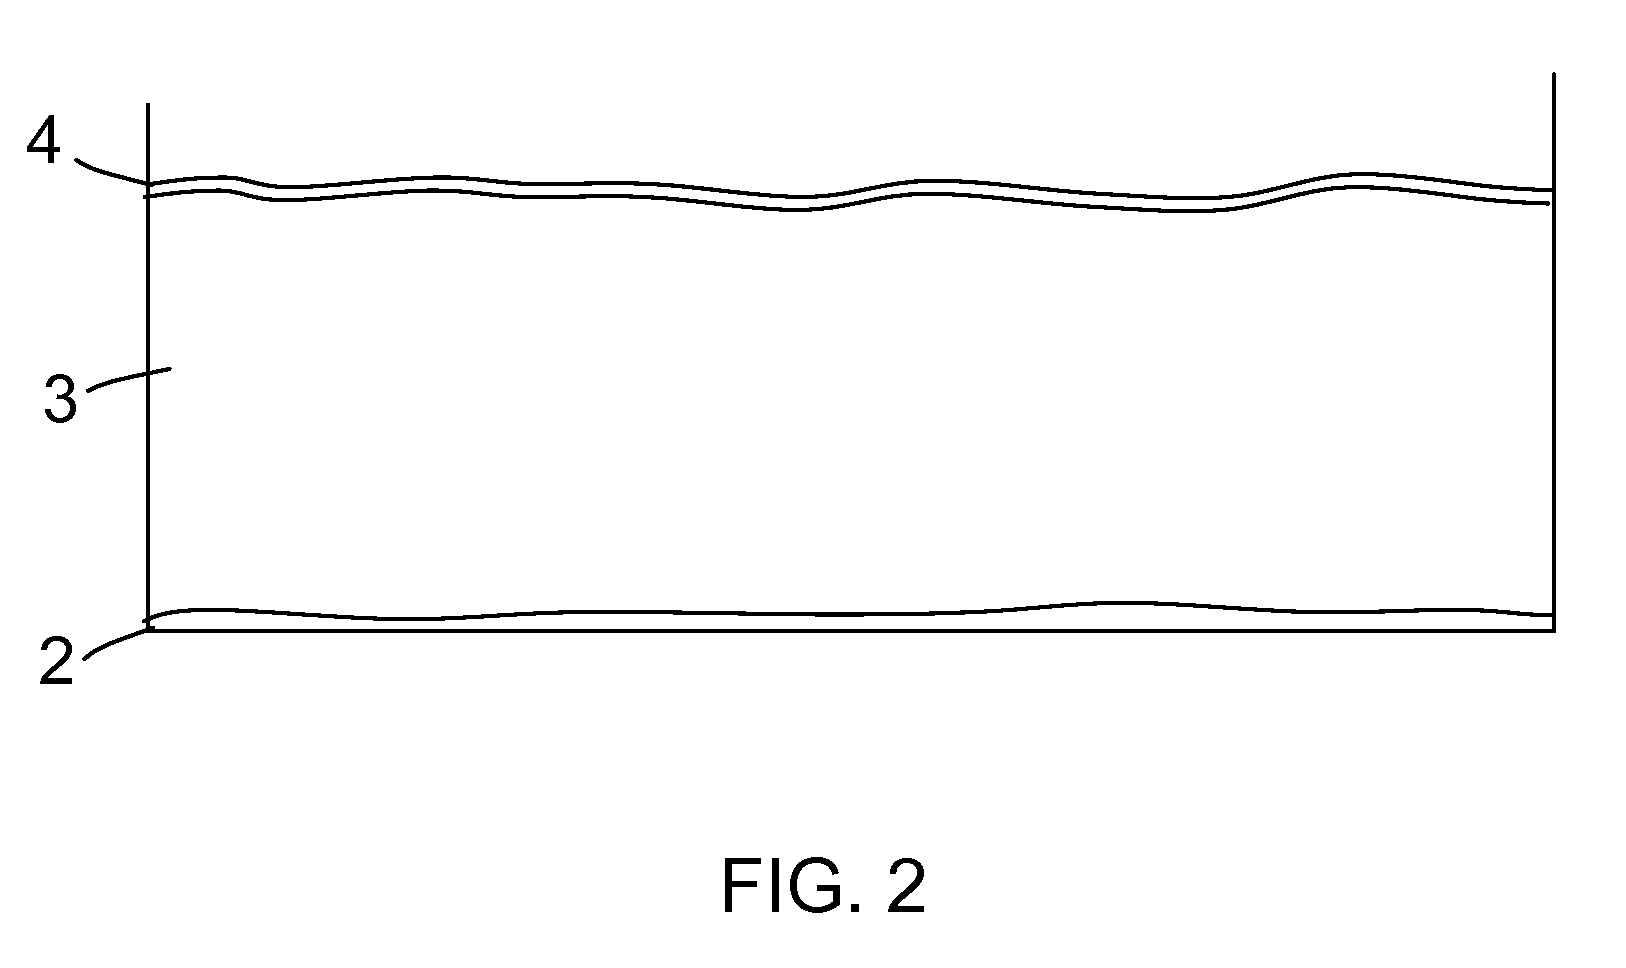 Horse Bedding Product and Method